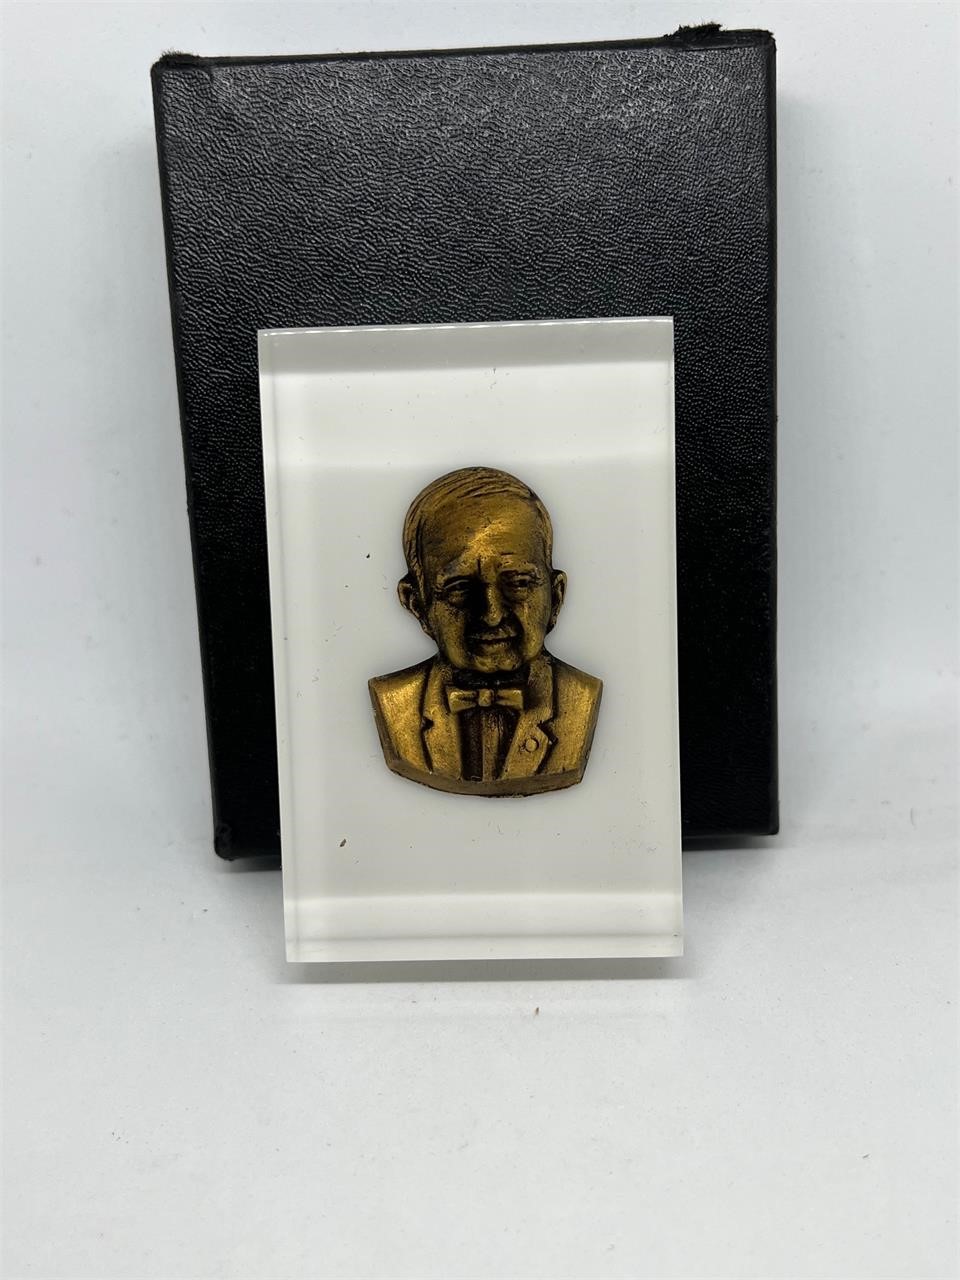 Vintage JC Penney Award Statue Bust Paperweight